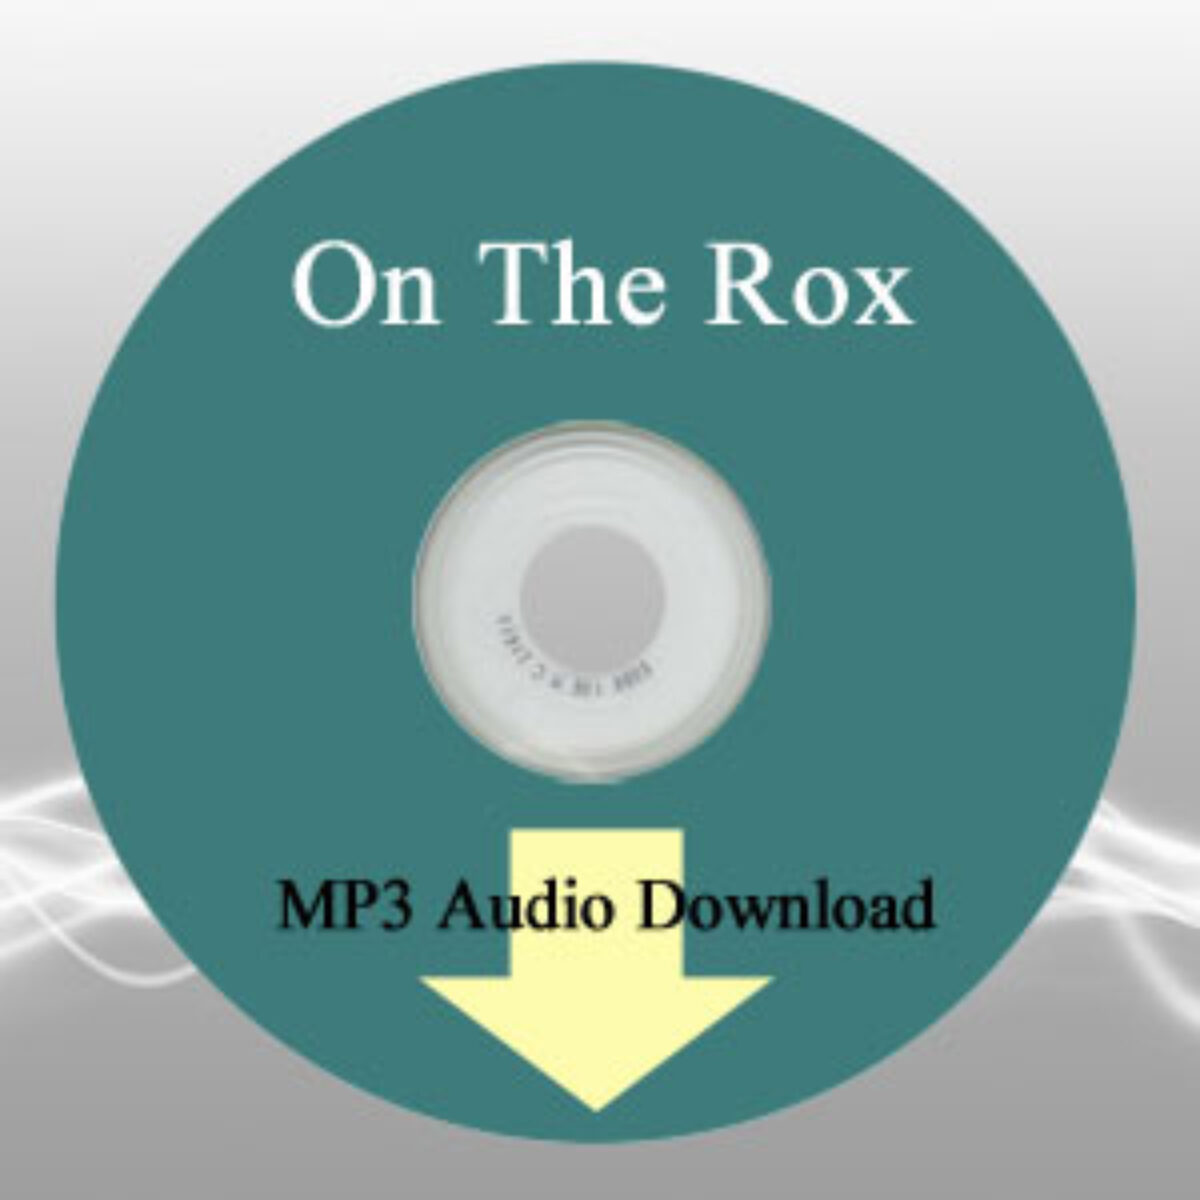 defekt Gavmild dans On the Rox MP3 product audio music download order purchase